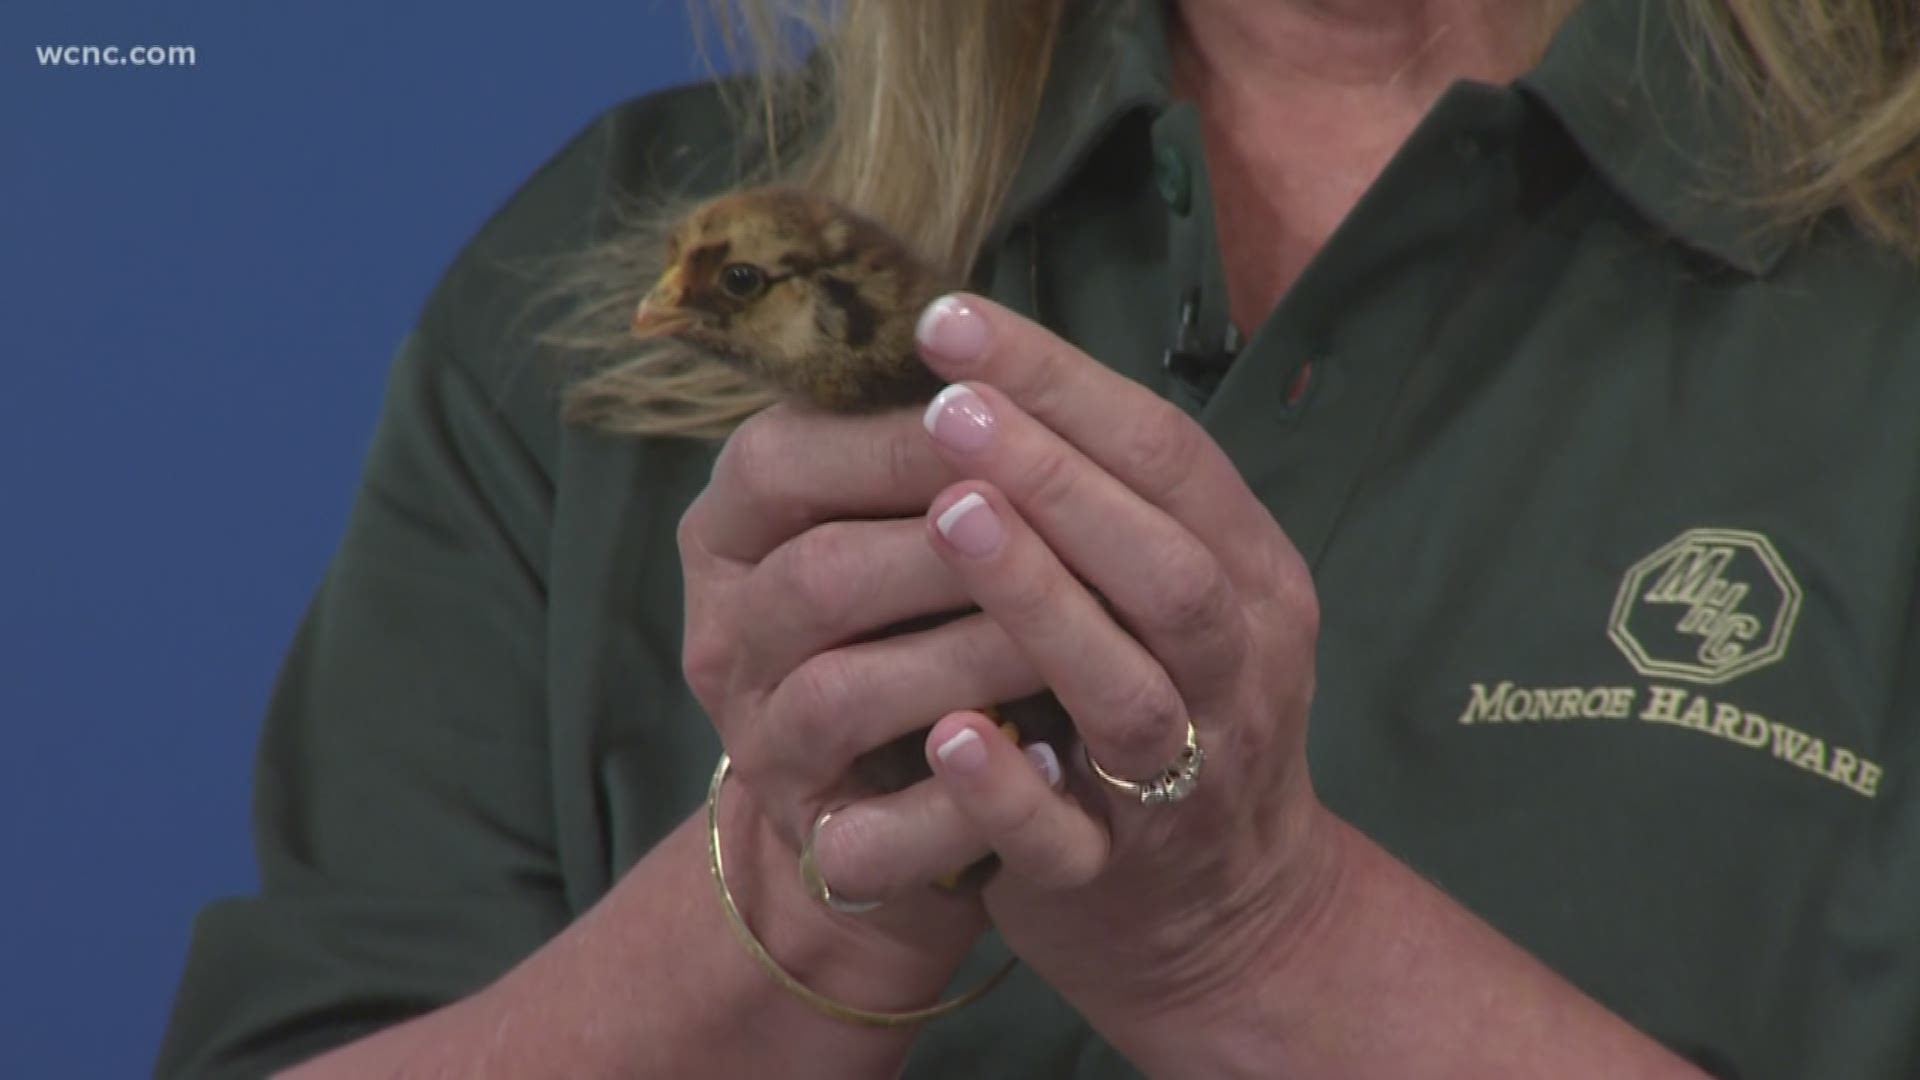 If you’ve thought about having your own backyard chickens, here are tips for getting started with your own chicks.
Guests: Eric Shupe, Purina Poultry Expert and Susan Sandall, Monroe Hardware.